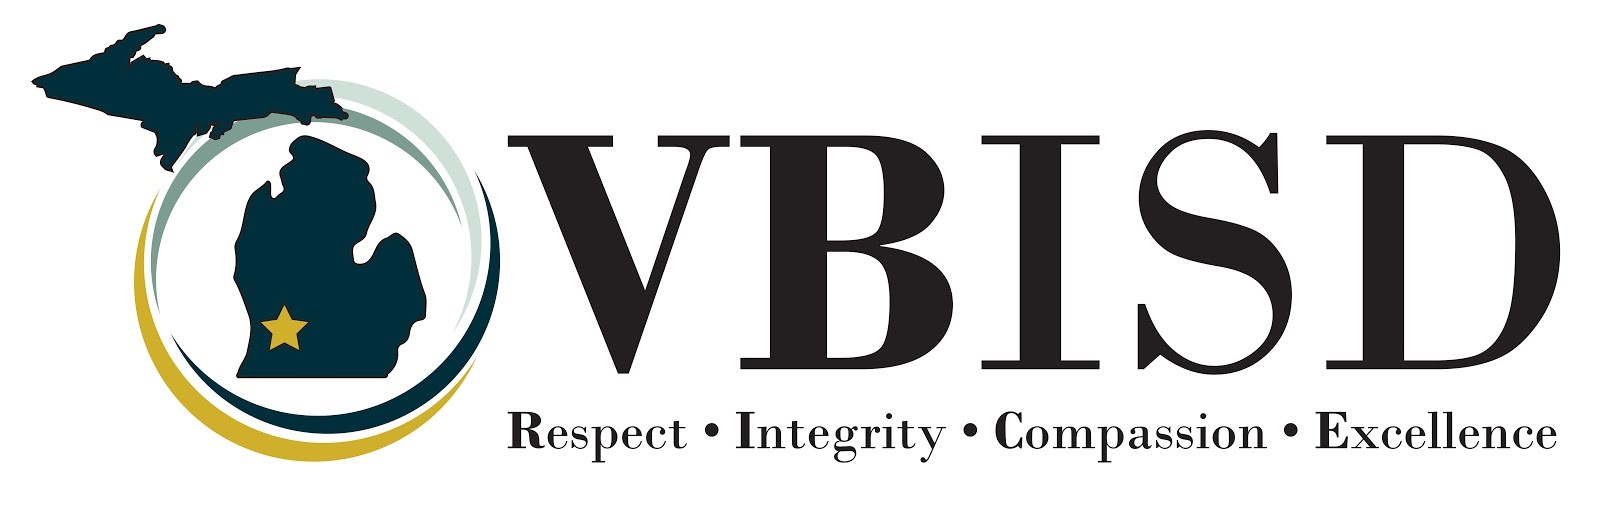 VBISD logo with tagline respect integrity compassion excellence